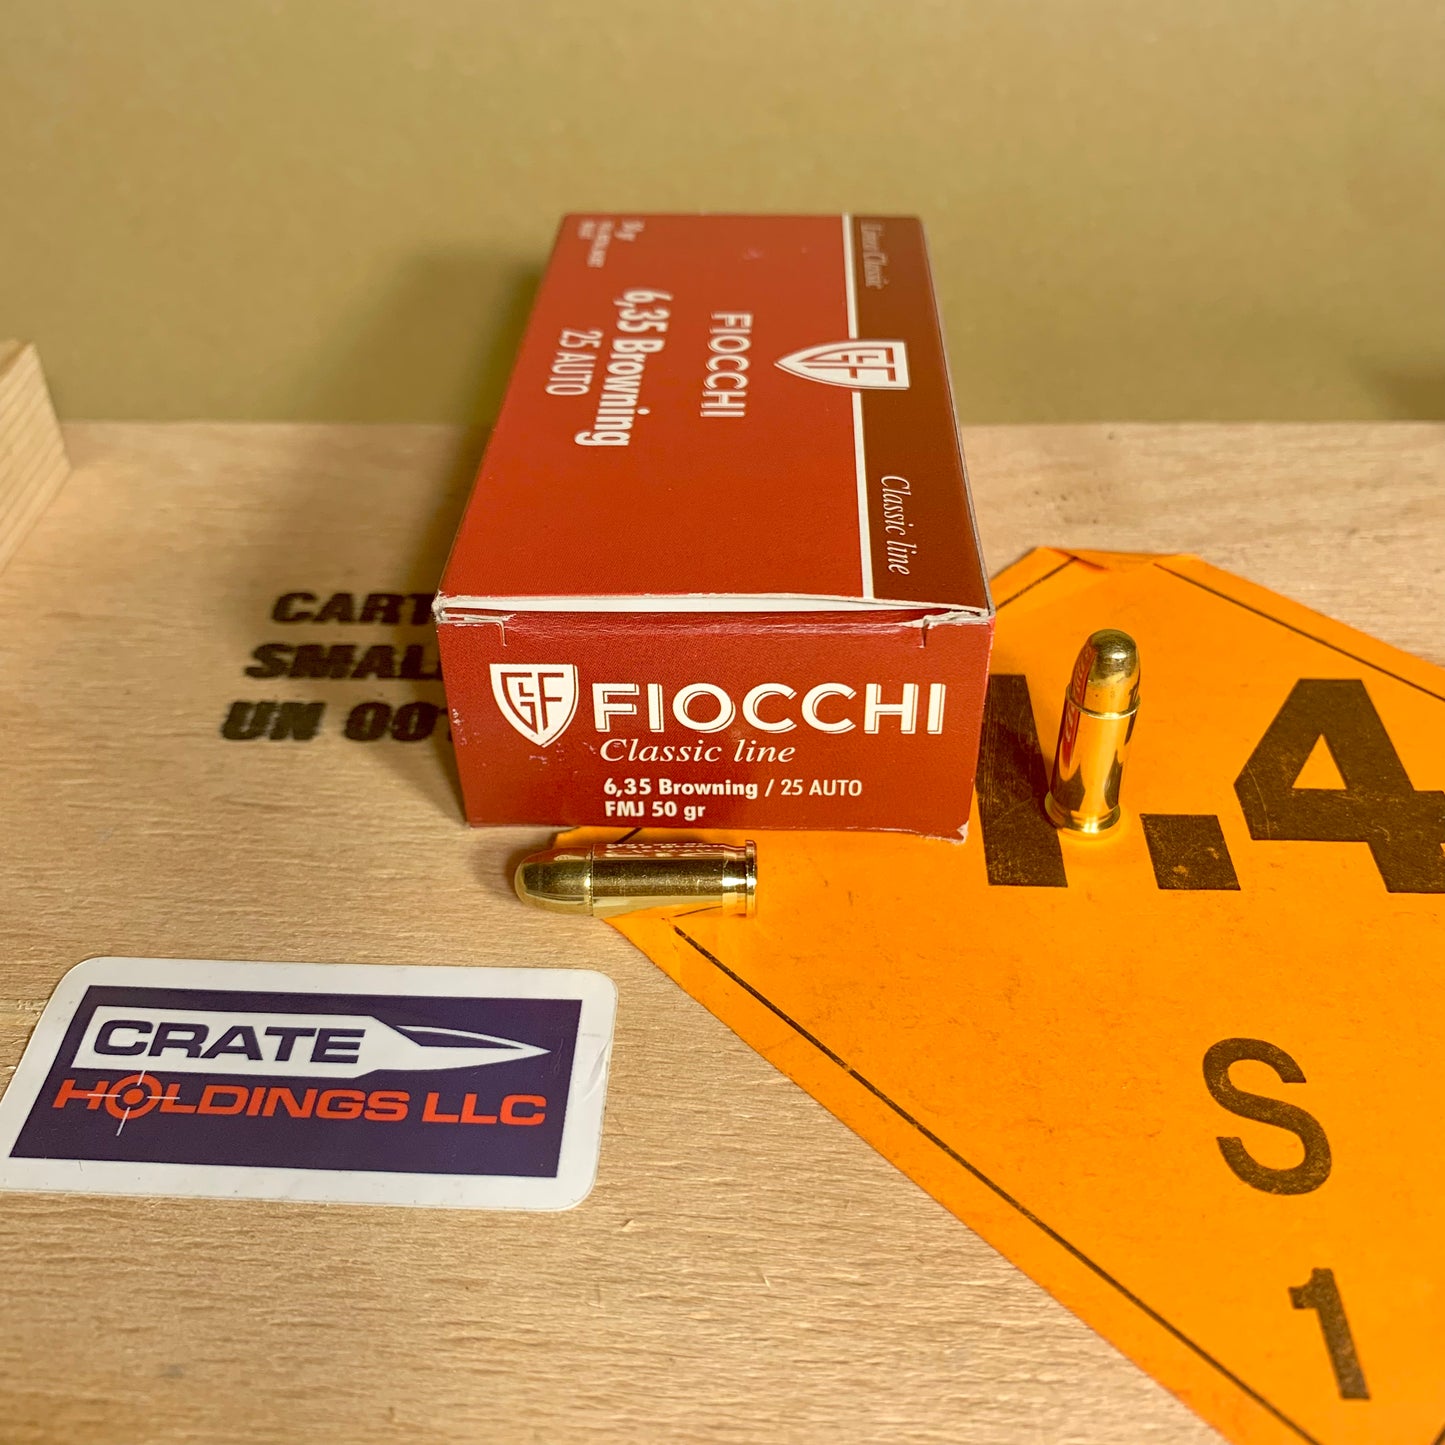 50 Rounds Fiocchi .25 ACP / 6.35 Browning Ammo 50gr FMJ - F25AP